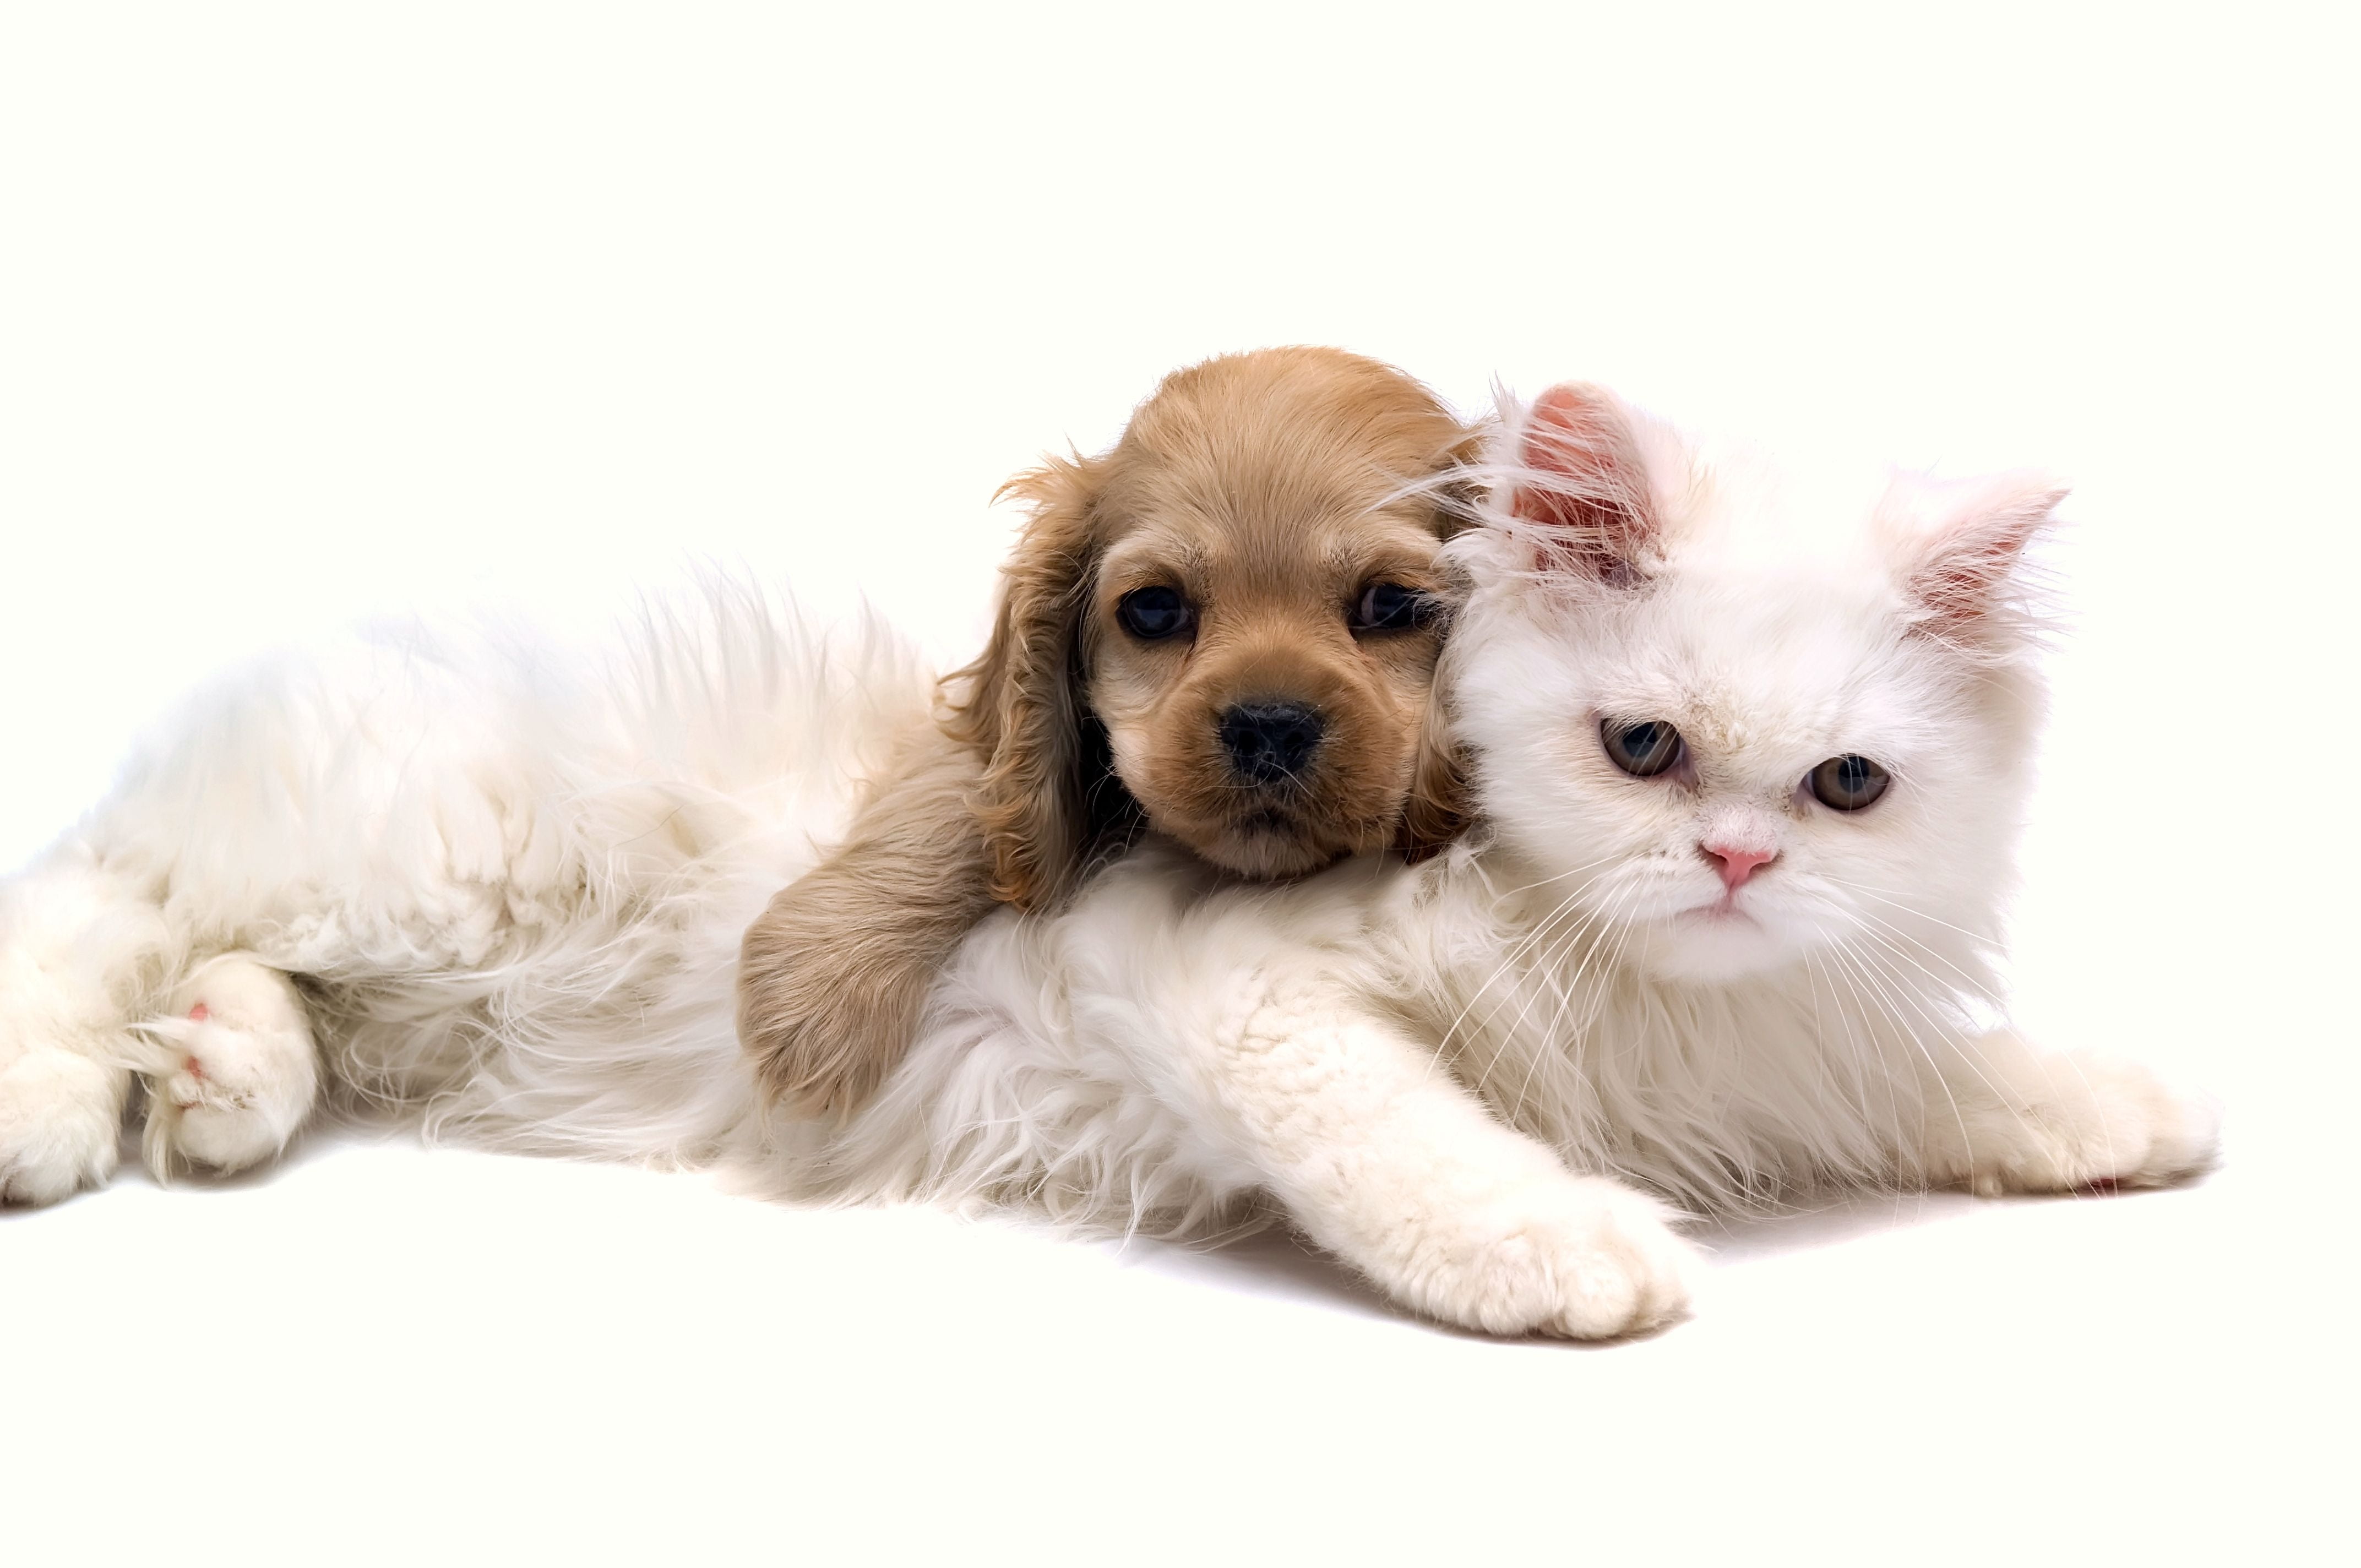 short-coat brown puppy lying on long-haired white cat